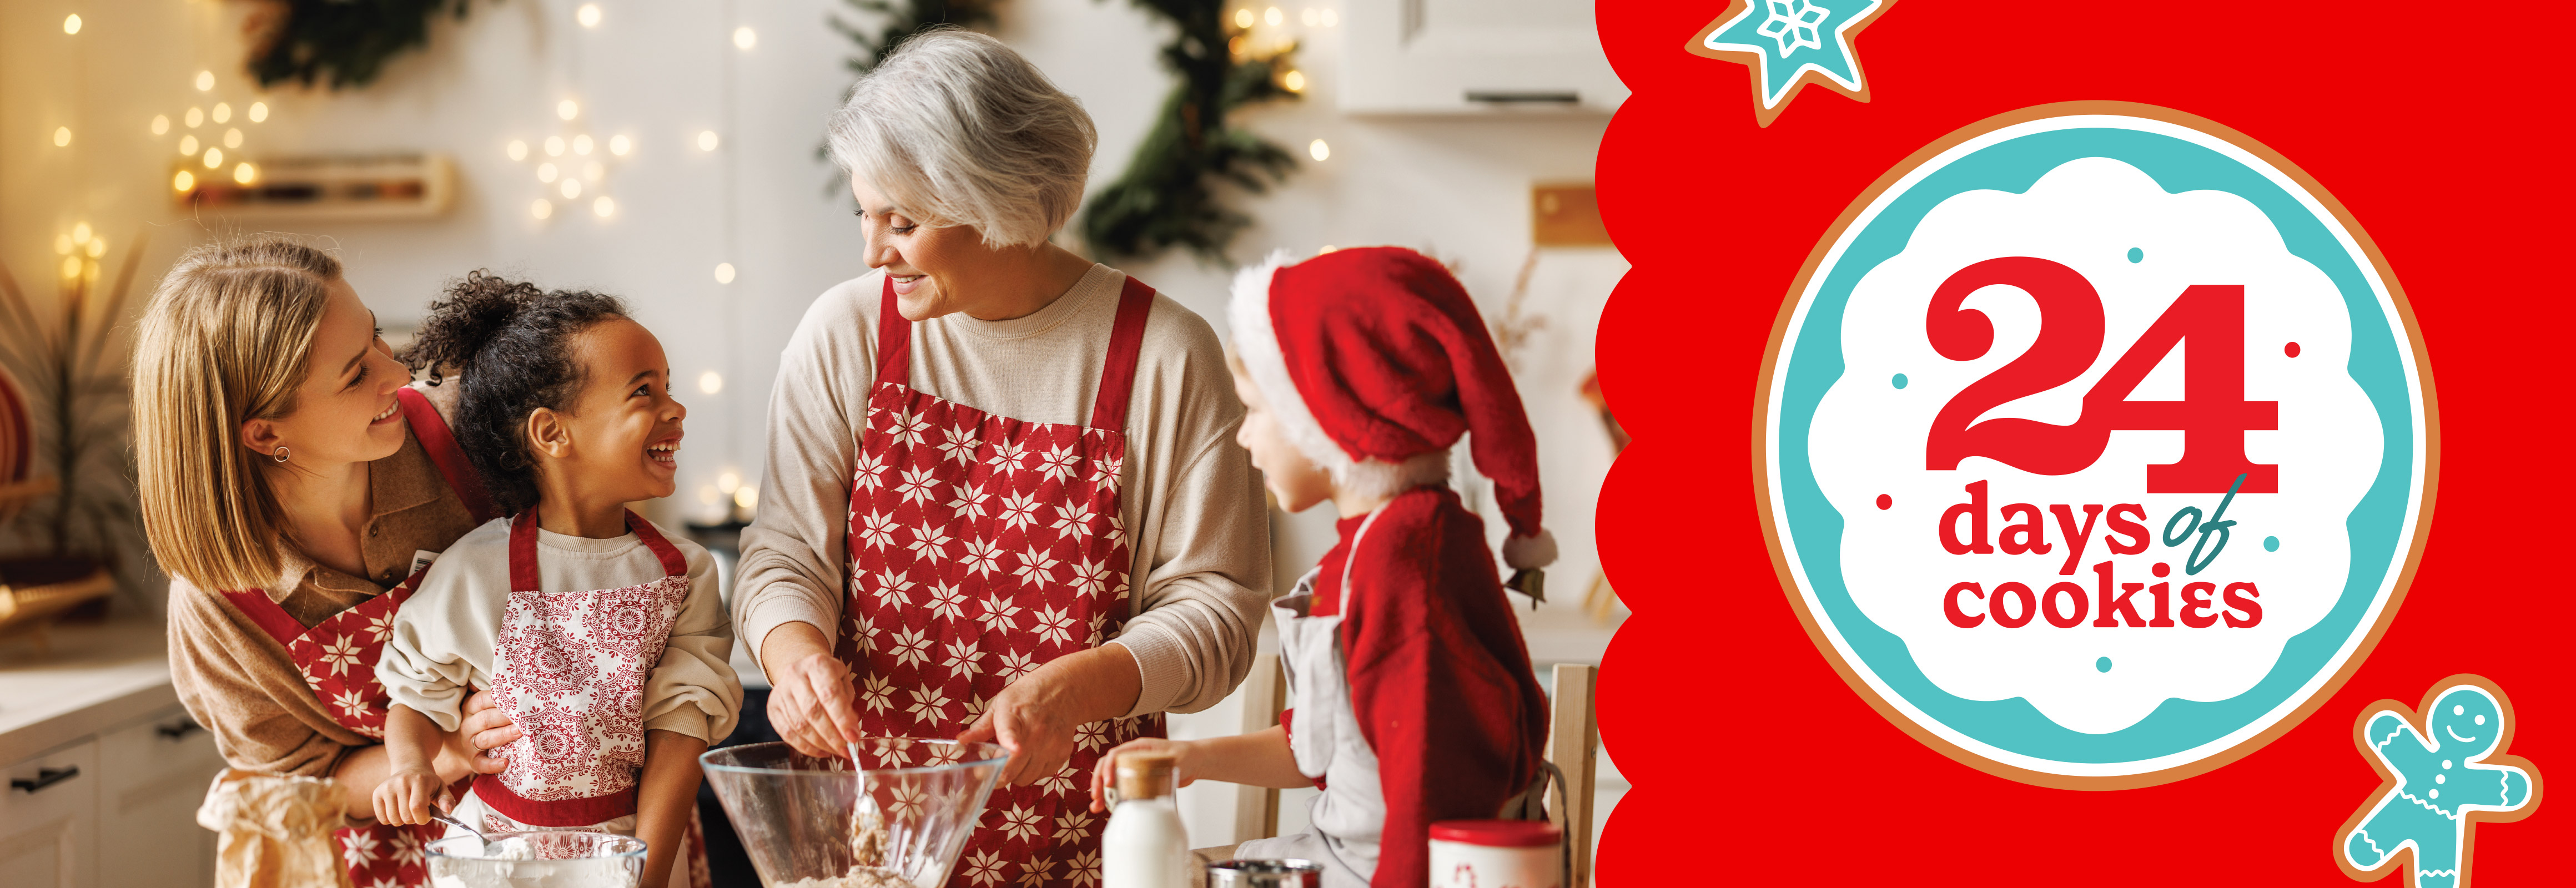 Grandma, mom and kids dressed in red and white, in a kitchen mixing cookies - 24 days of cookies